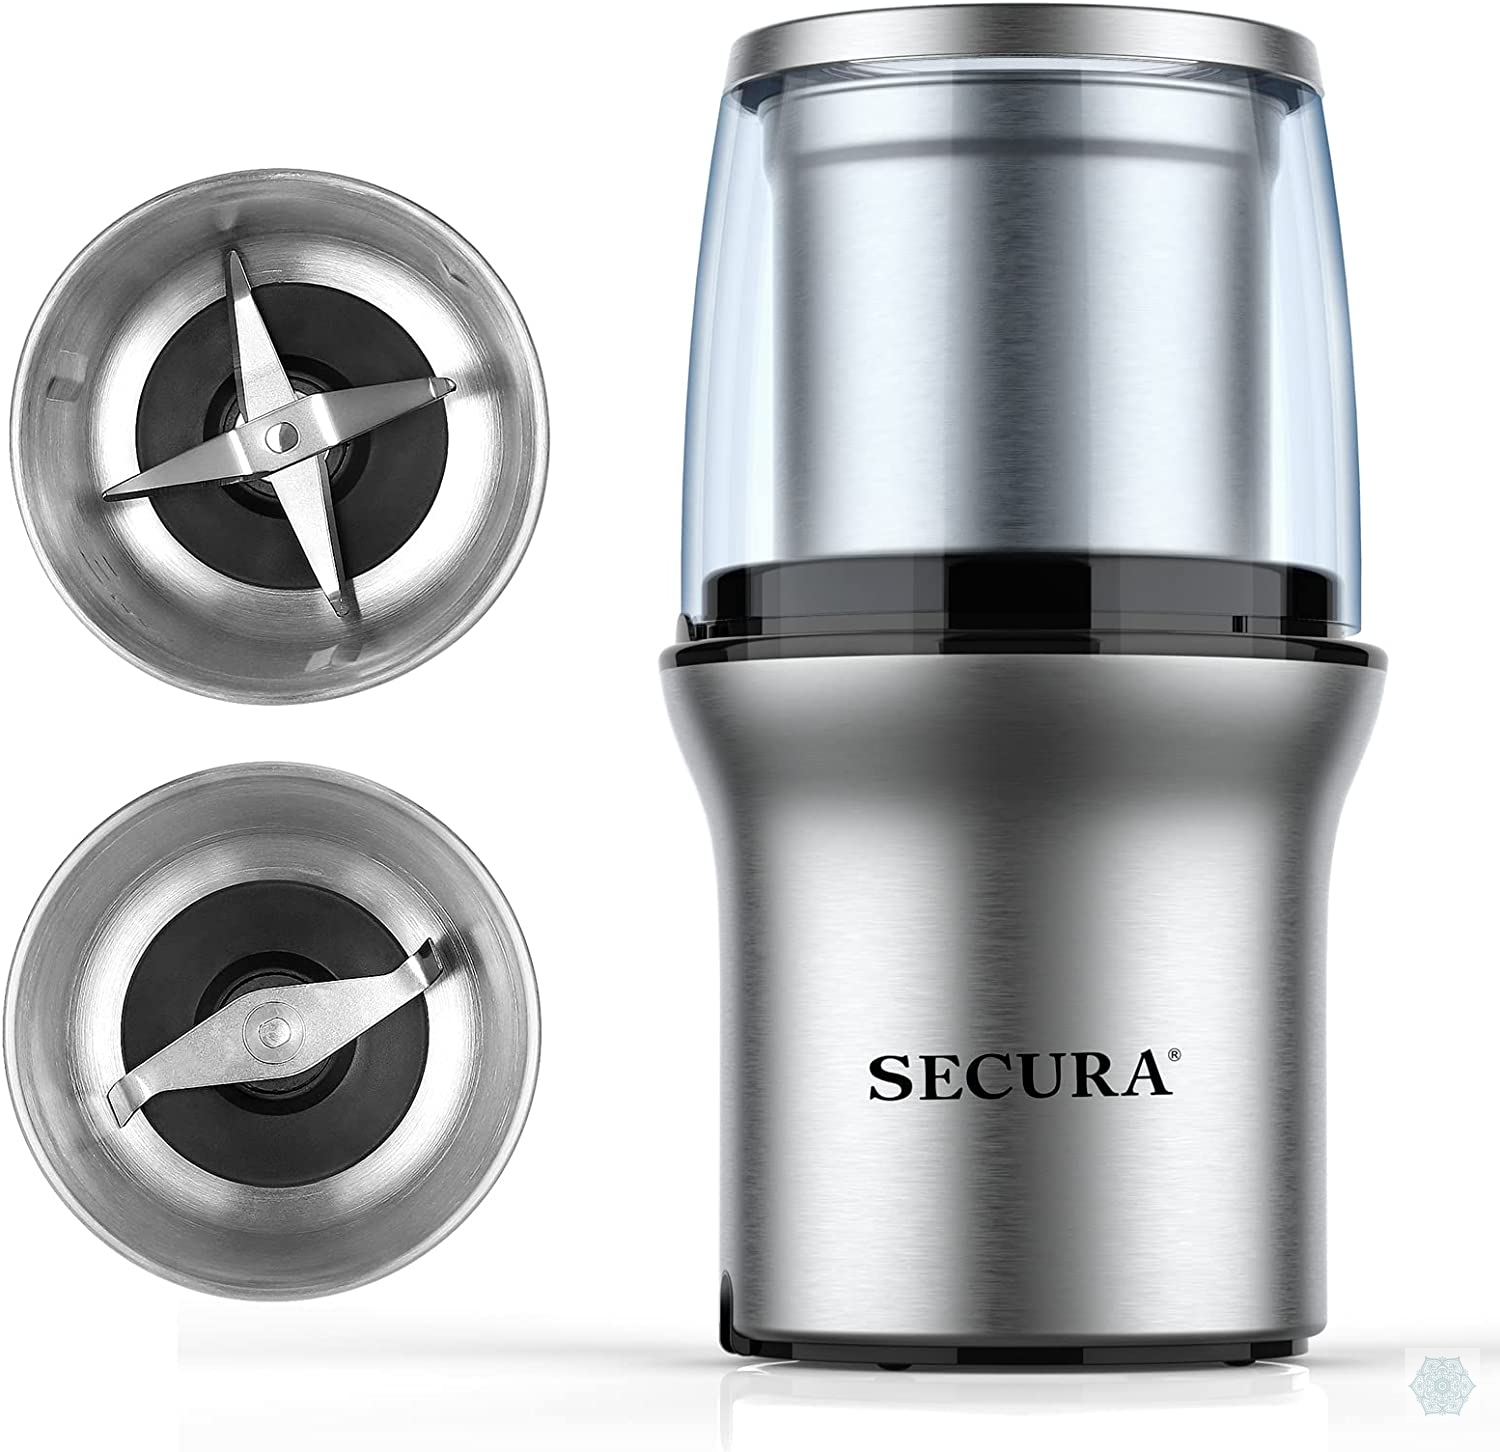 Secura Electric Coffee Grinder and Spice Grinder 